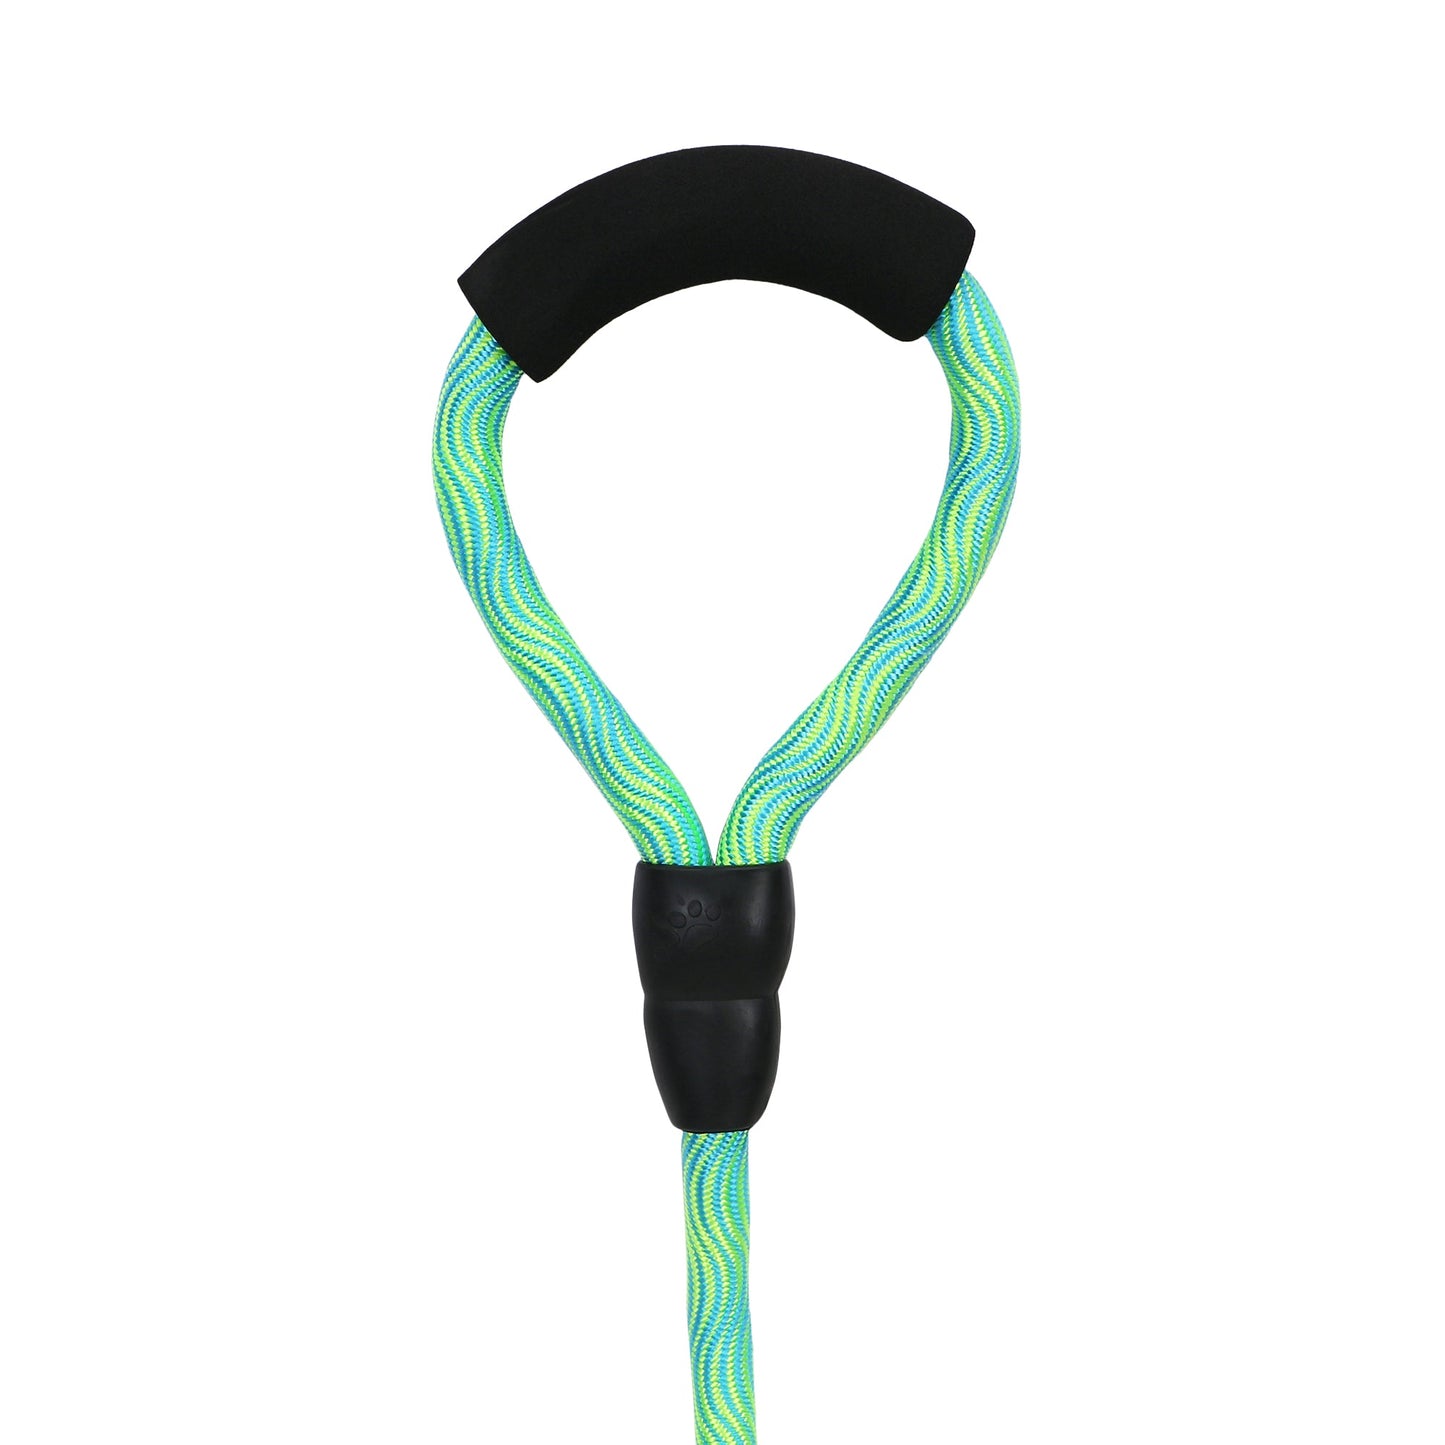 BASIL High Reflective Rope Leash for Dogs & Puppies, 4 Feet (Yellow & Green)